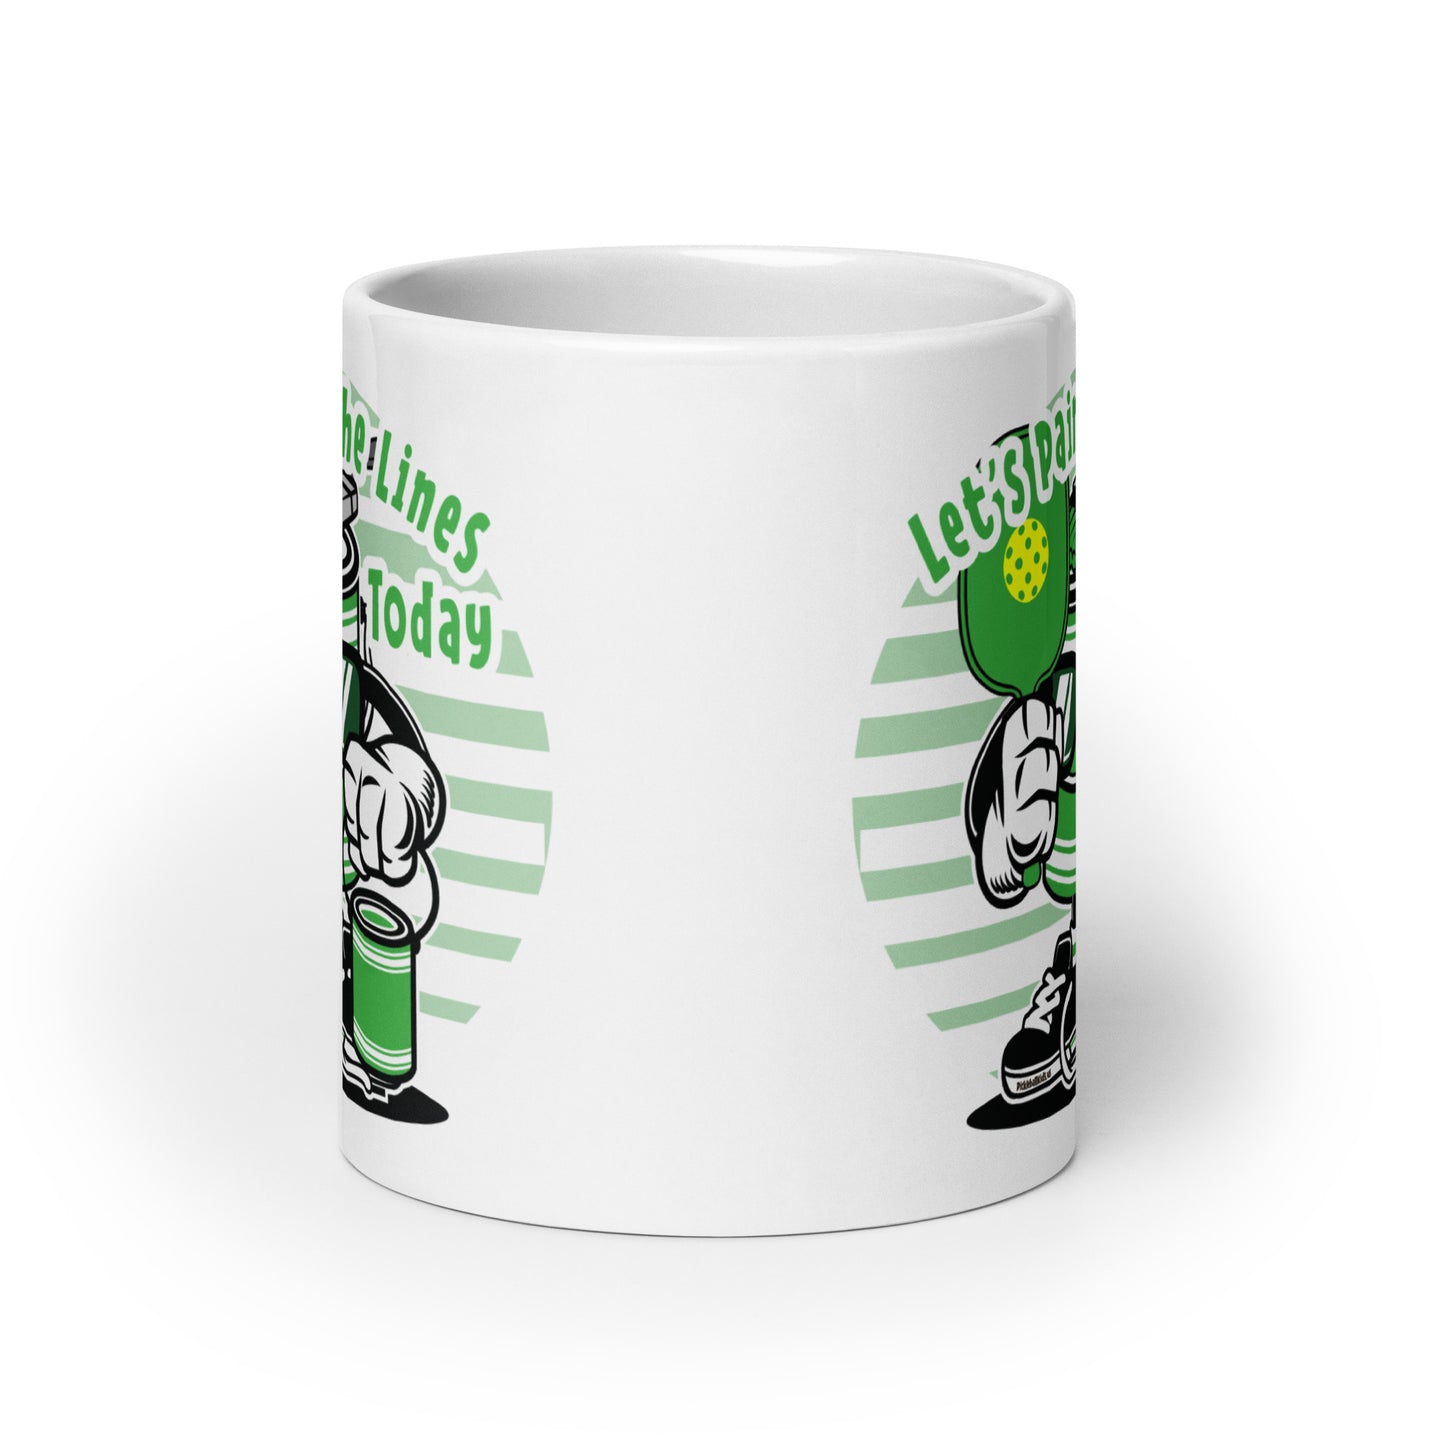 Fun Puns on Pickleball Coffee White Glossy Mug, "Let's Paint The Lines Today"